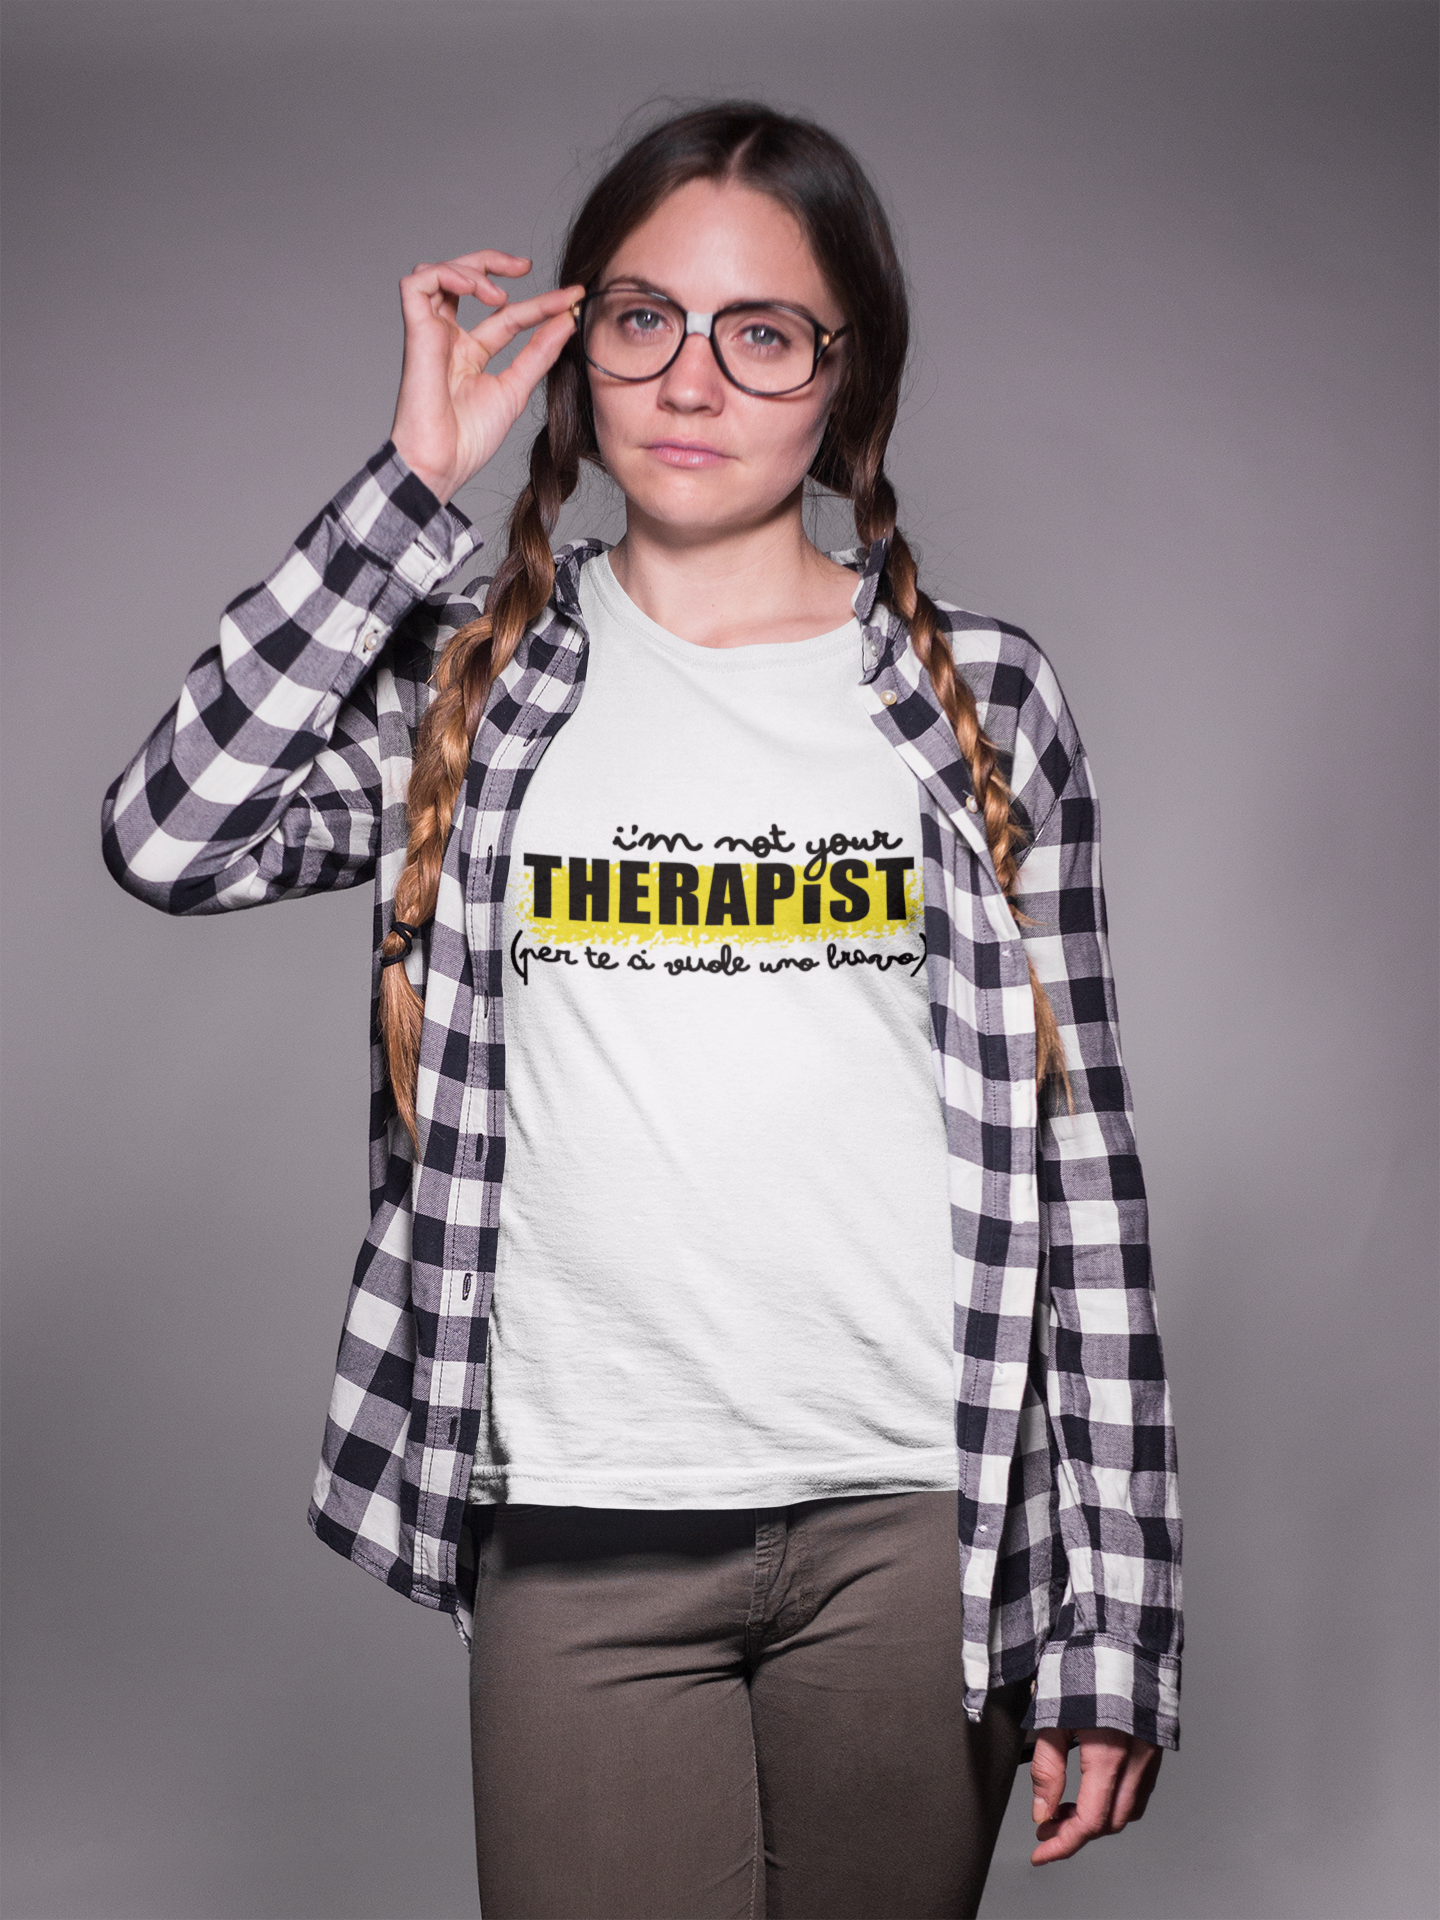 T-Shirt • I'm not your THERAPIST